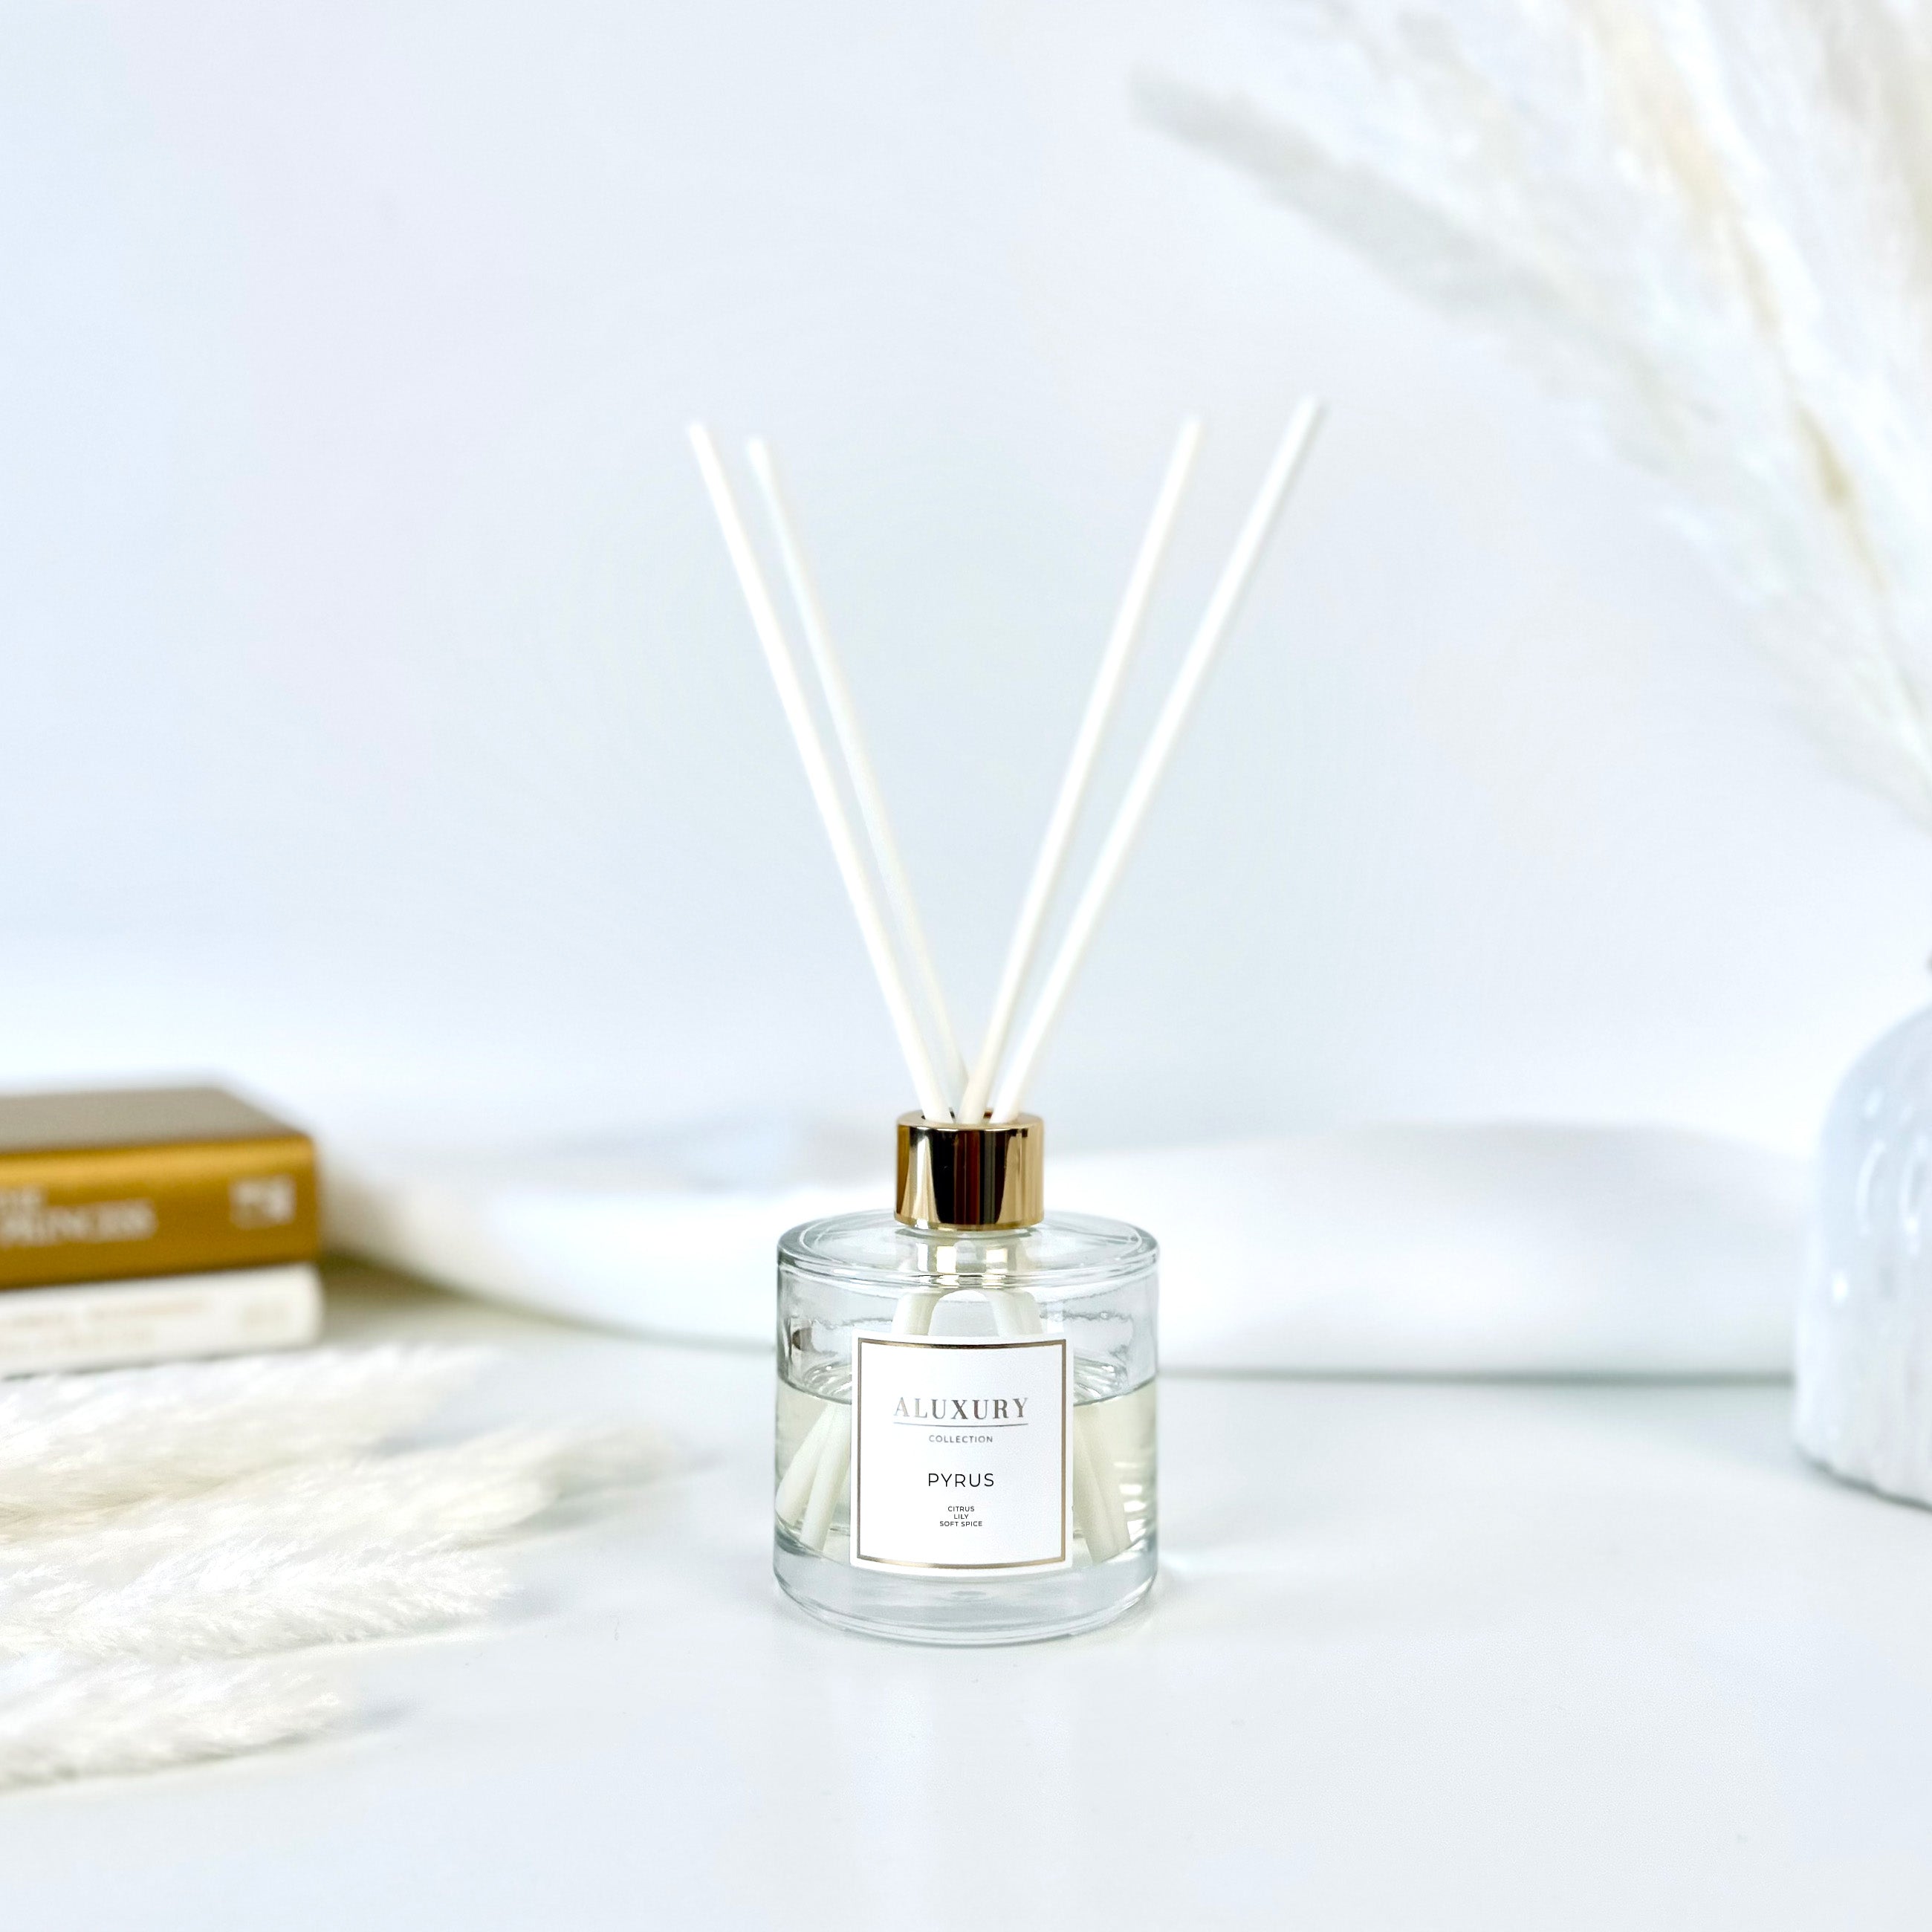 Pyrus Luxury Reed Diffuser by Aluxury